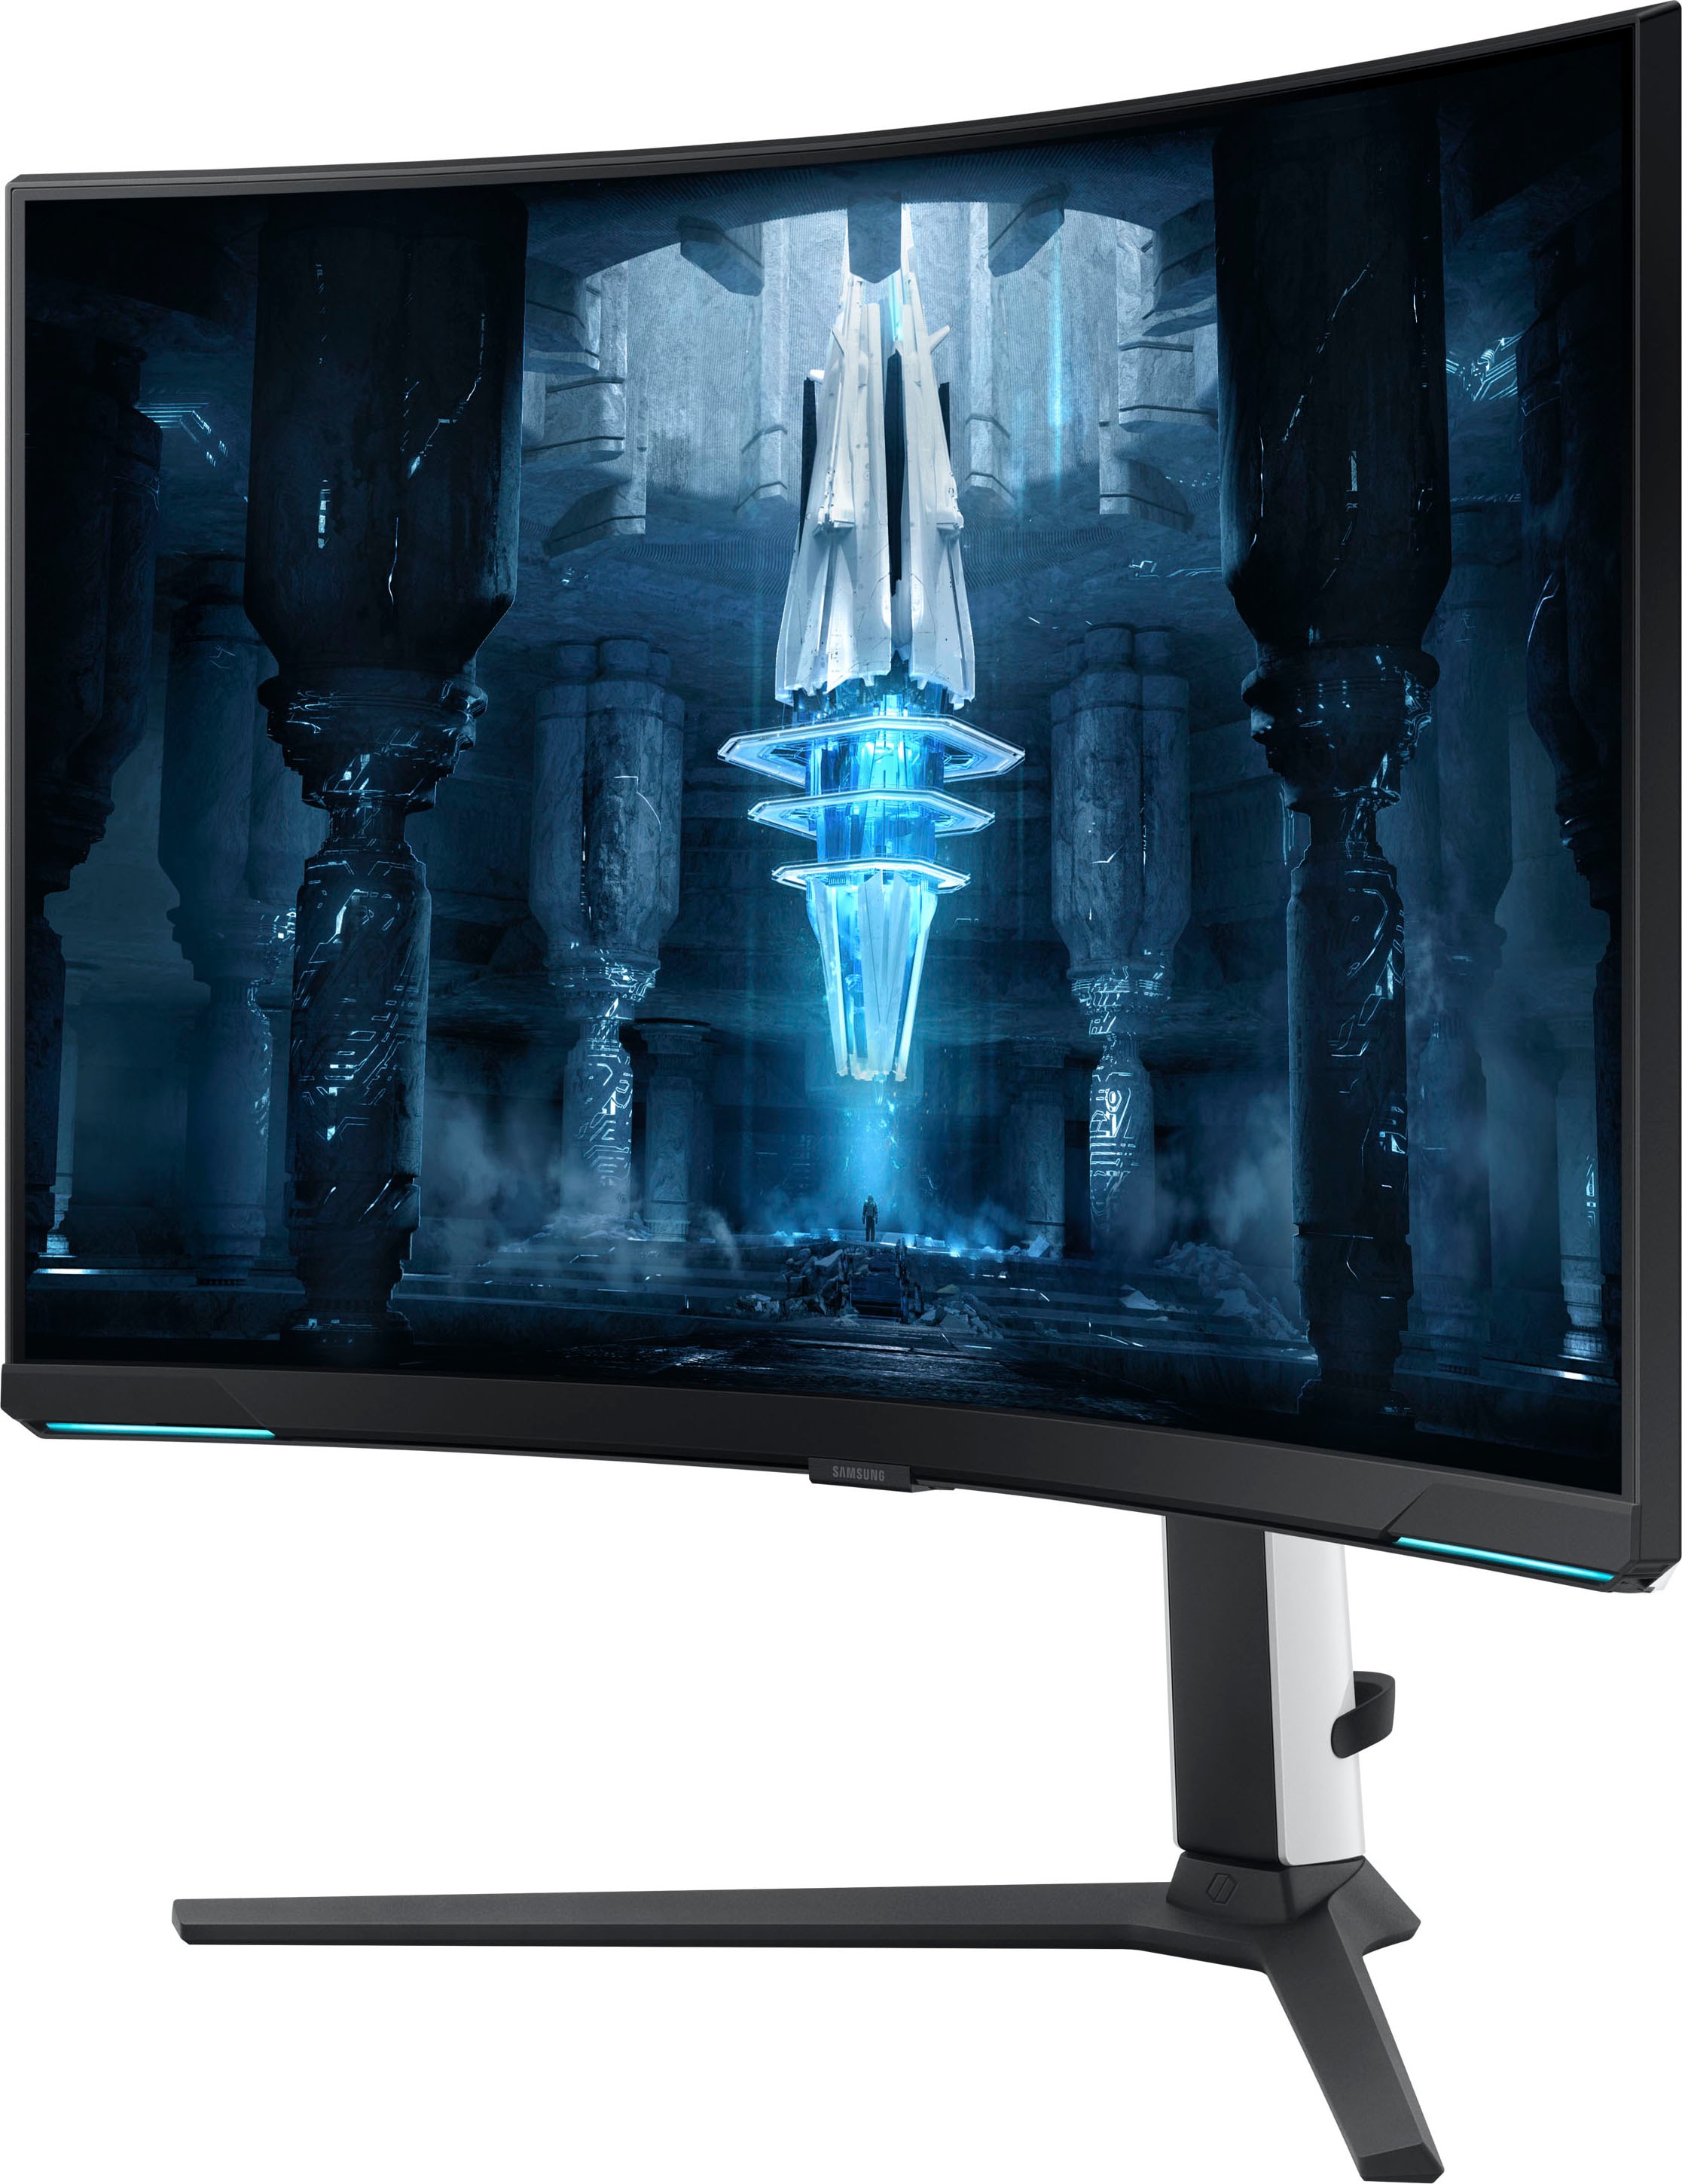 Samsung Curved-Gaming-LED-Monitor »Odyssey Neo G8 S32BG850NP«, x 2160 ms 1ms bei HD, 1 Zoll, 3840 4K Ultra OTTO 165 (G/G) Hz, 81 cm/32 Reaktionszeit, px